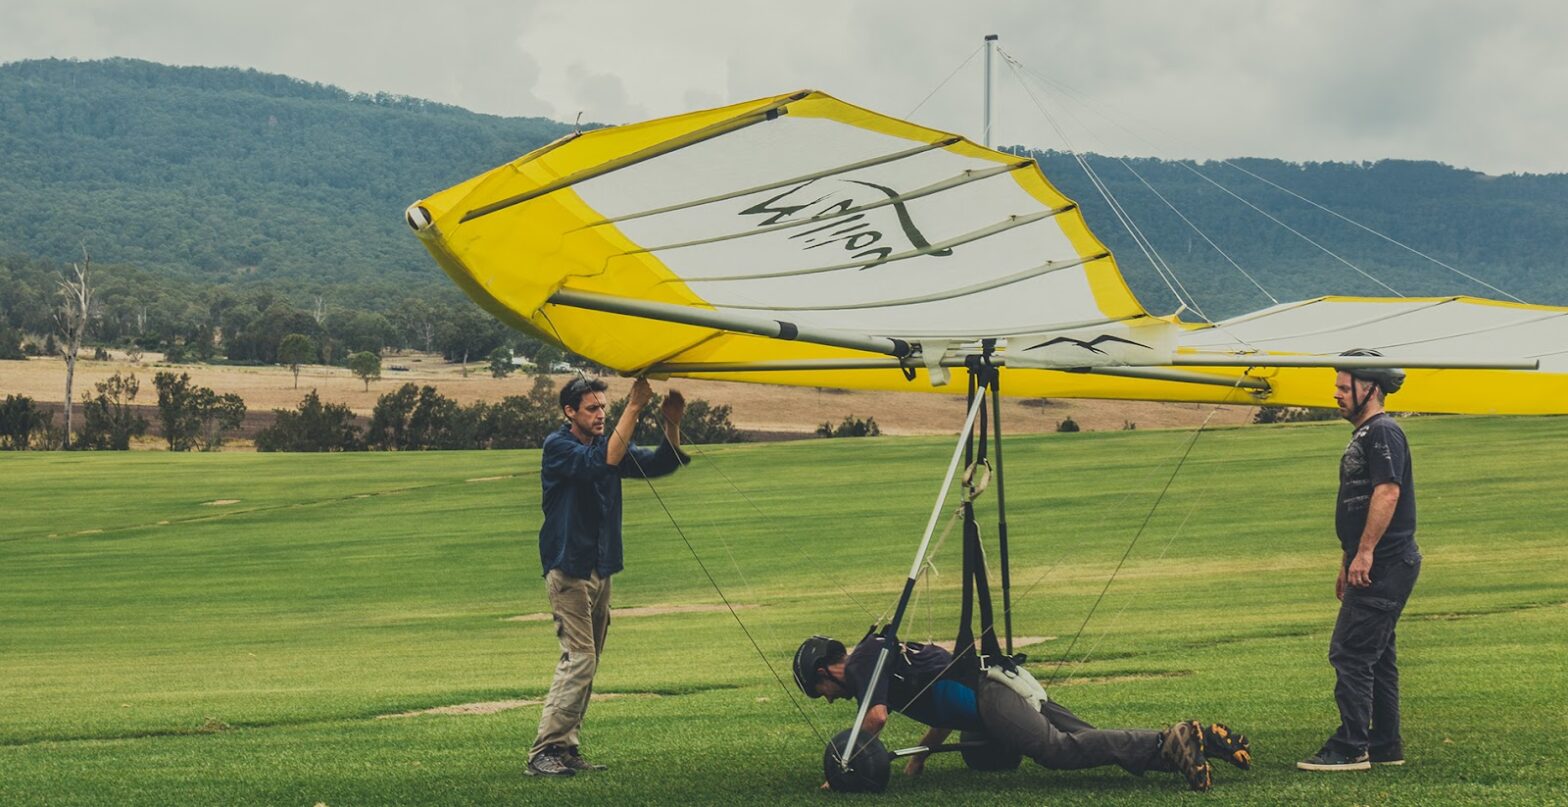 A man prepares to fly a hang glider with two other men helping him